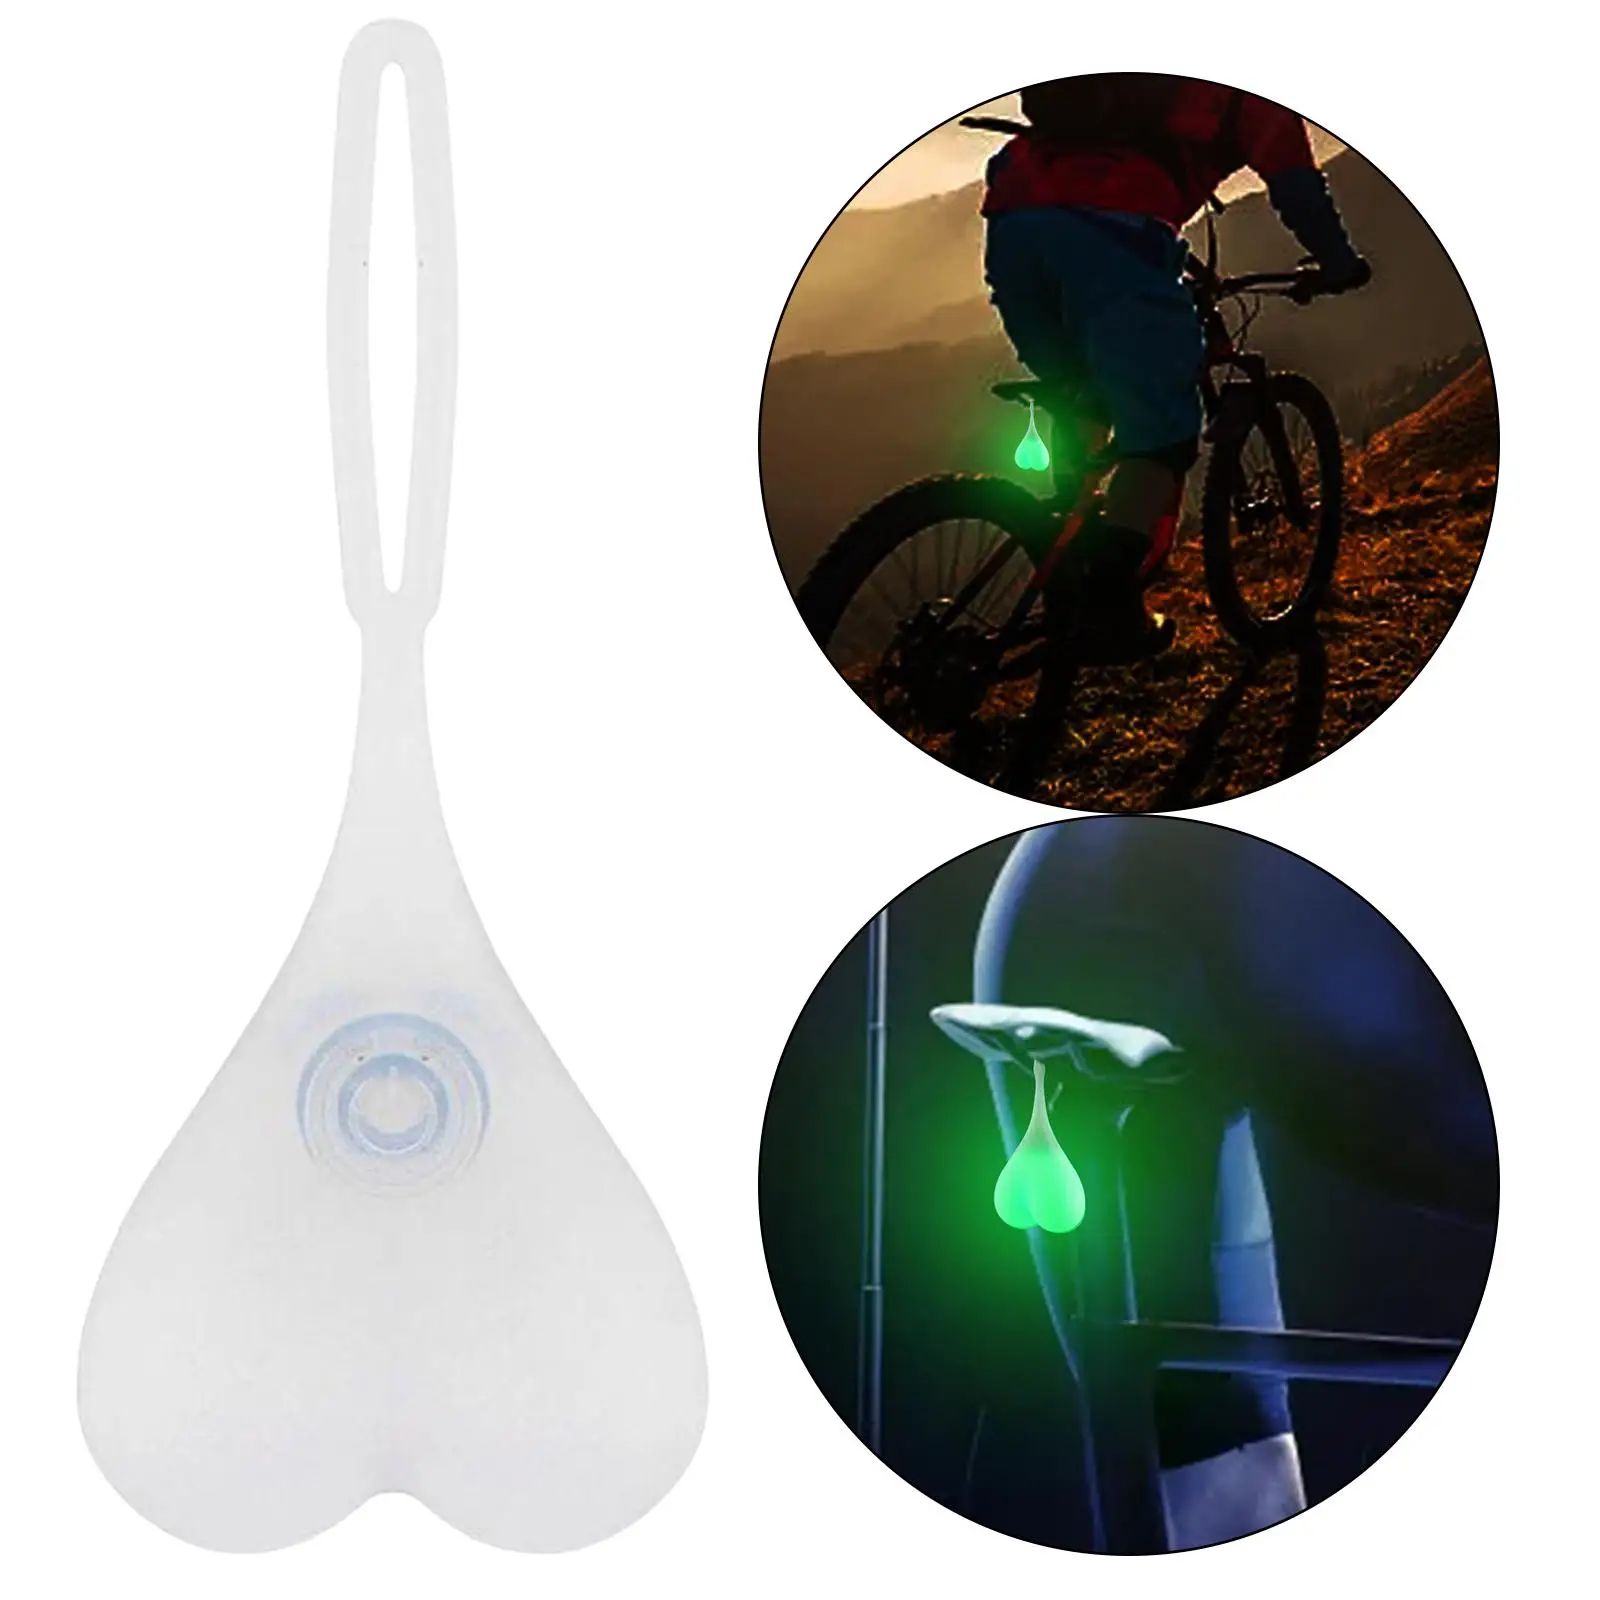 Bike Tail Light Innovative Heart-Shaped Hanging Portable Multi-Purpose Silicone Waterproof Night Warning Balls LED Rear Bike Lamp for Cycling Camping Outdoor Indoor 